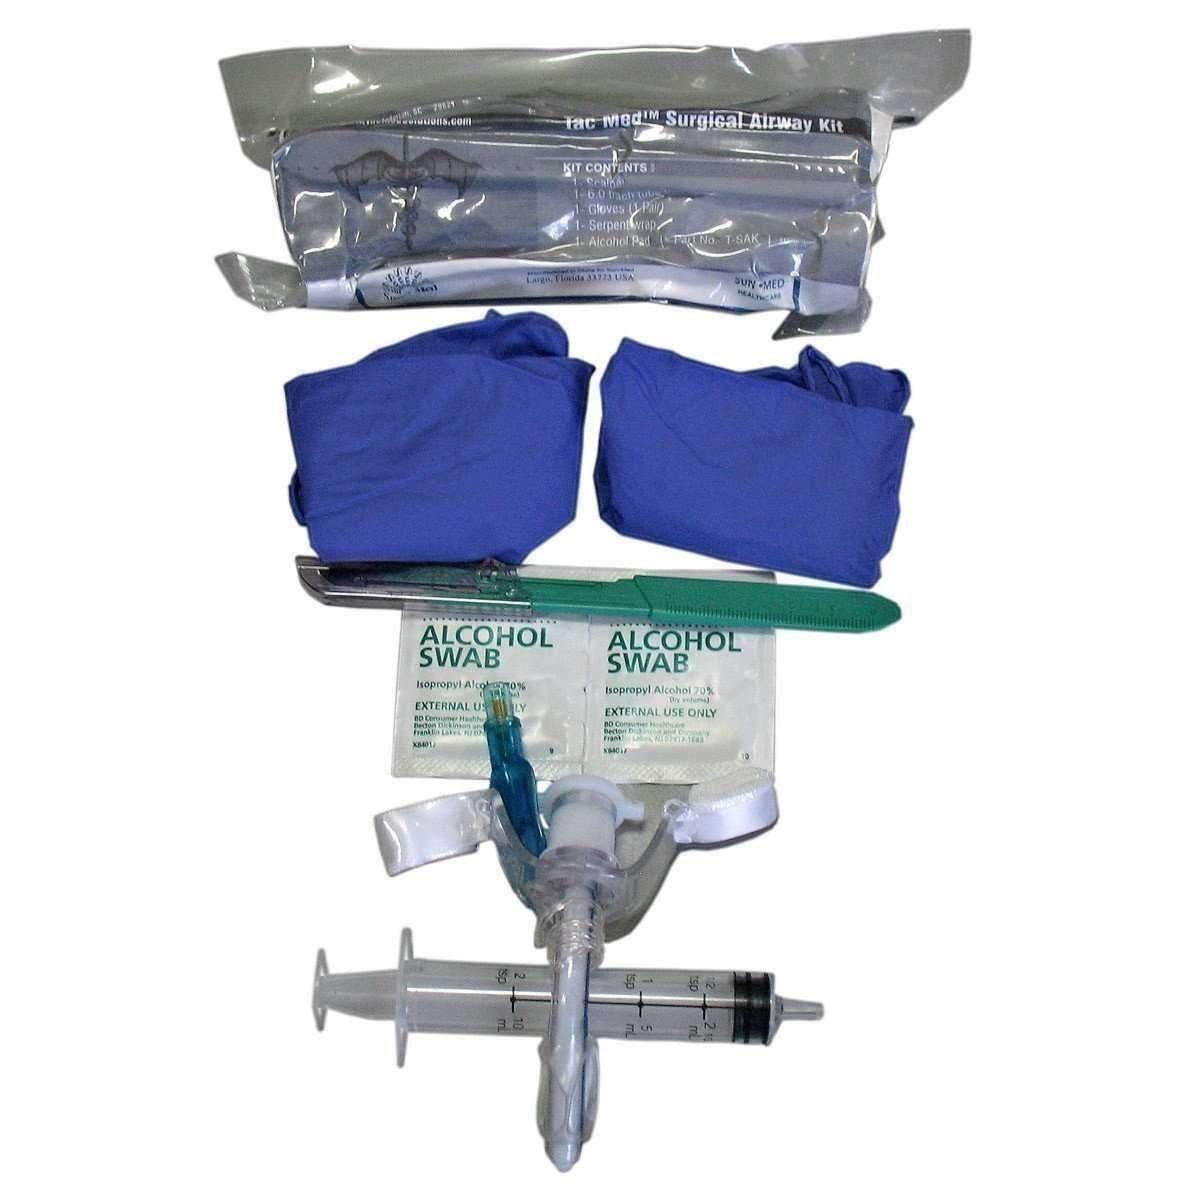 TacMed™ Surgical Airway Kit - Vendor